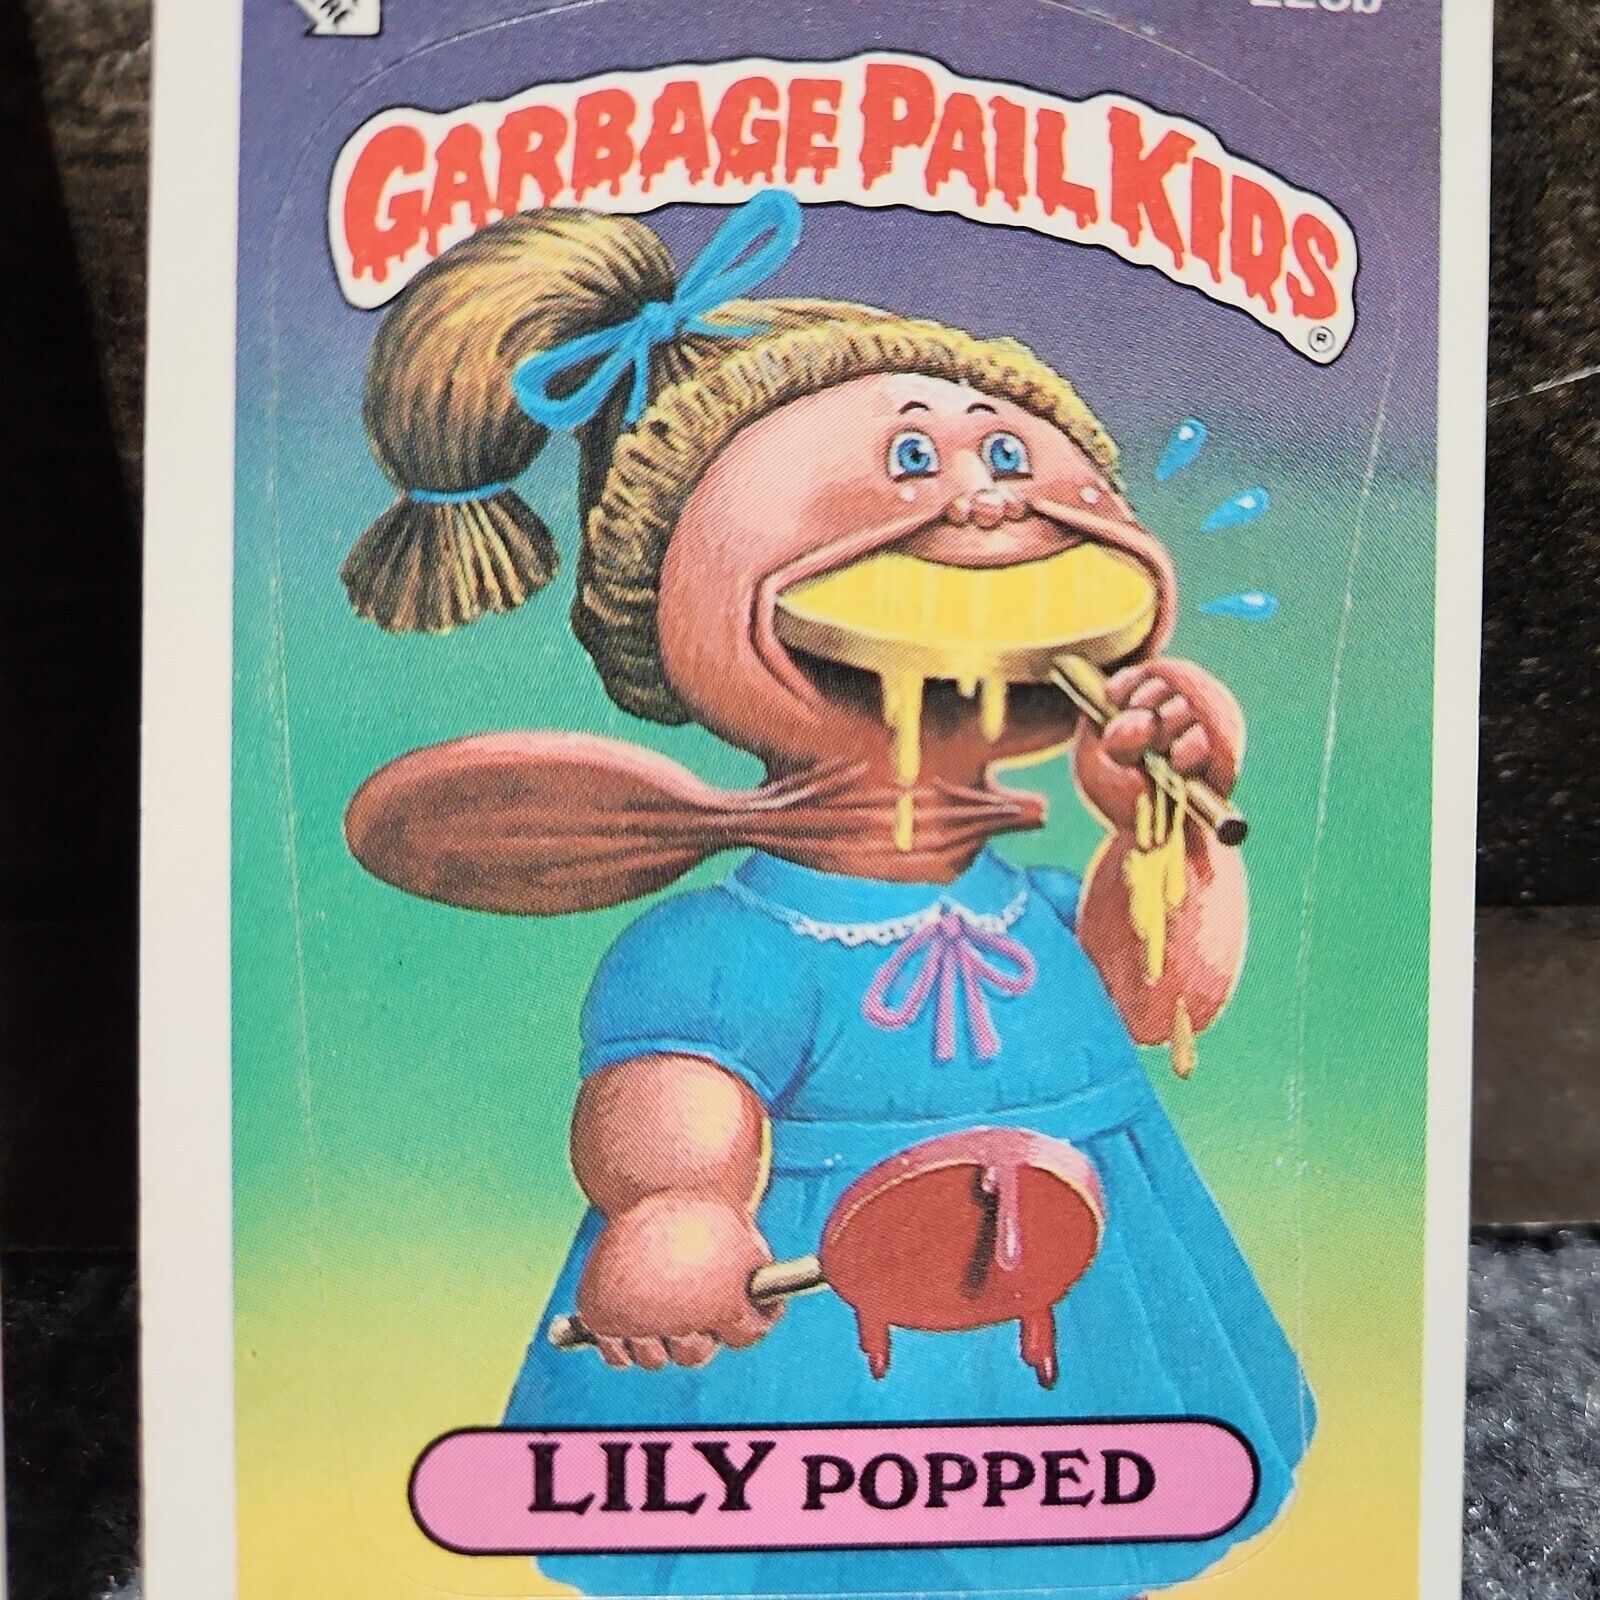 2x Lily Popped VTG 1986 Topps Garbage Pail Kids #223b Trading Cards